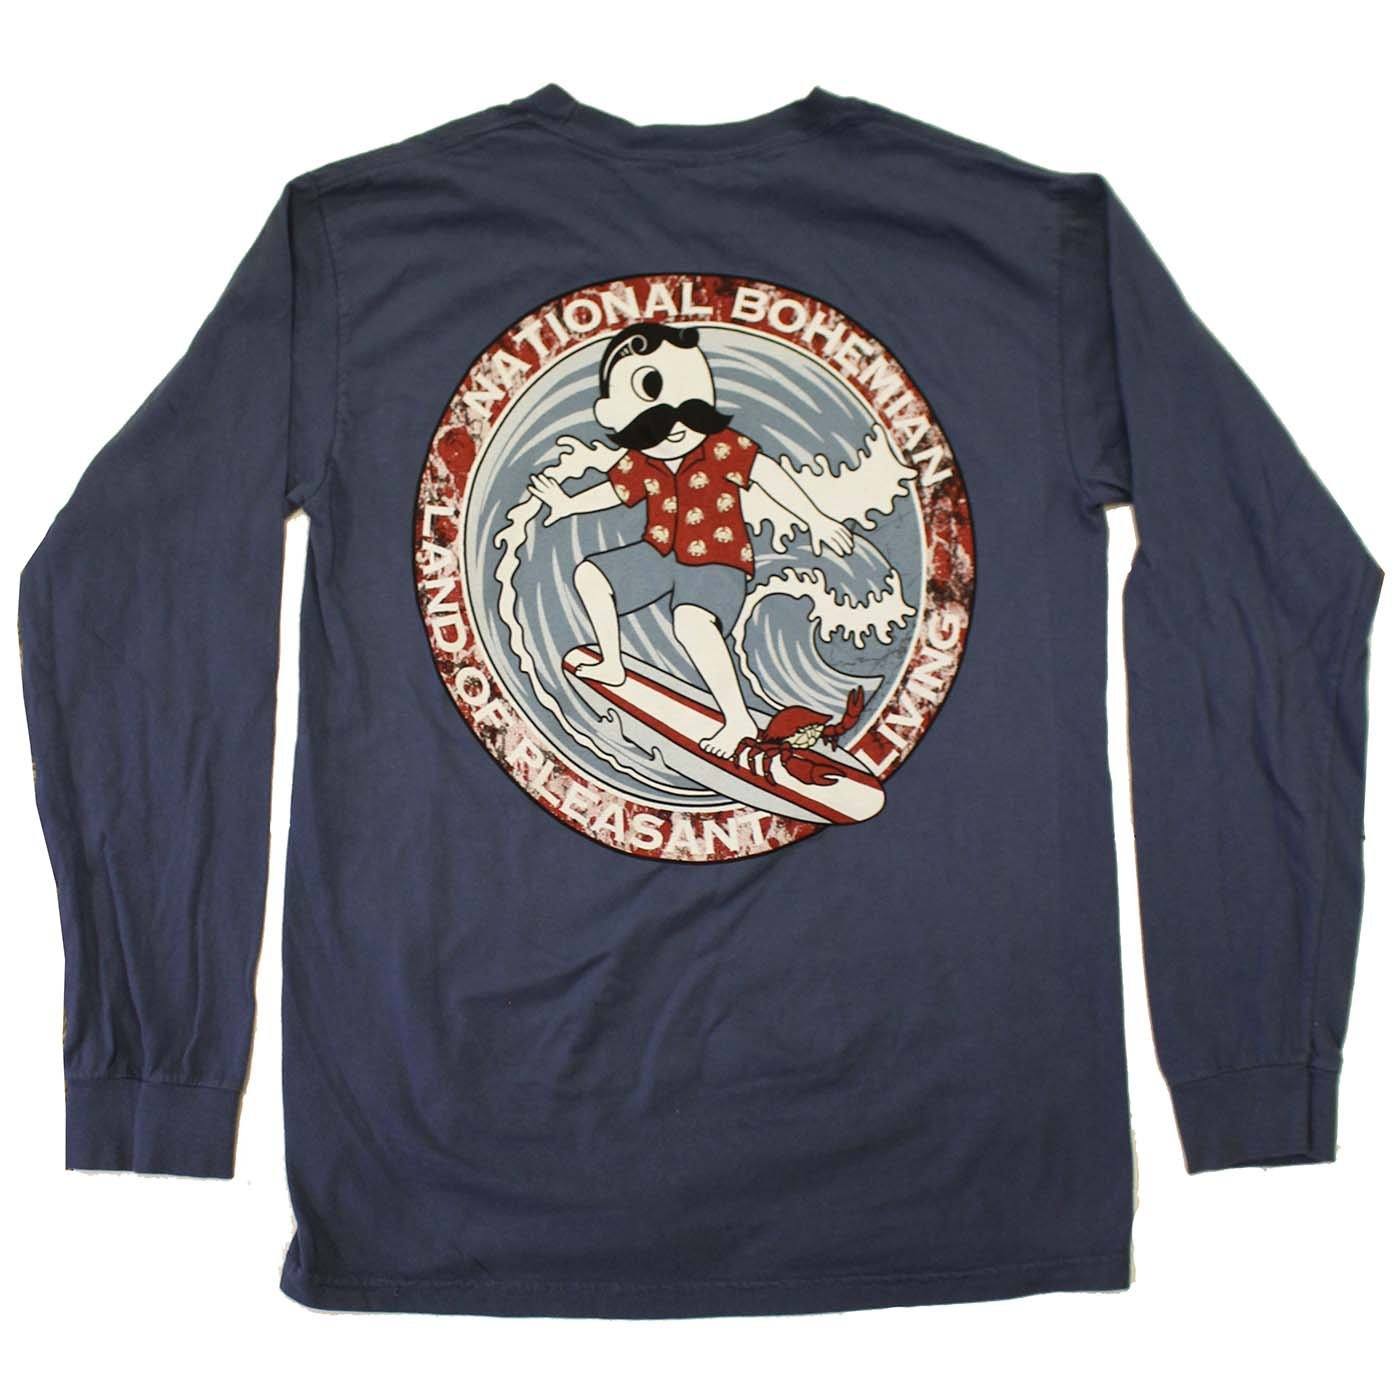 Retro Boh Wave Surfing (Midnight) / Long Sleeve Shirt - Route One Apparel